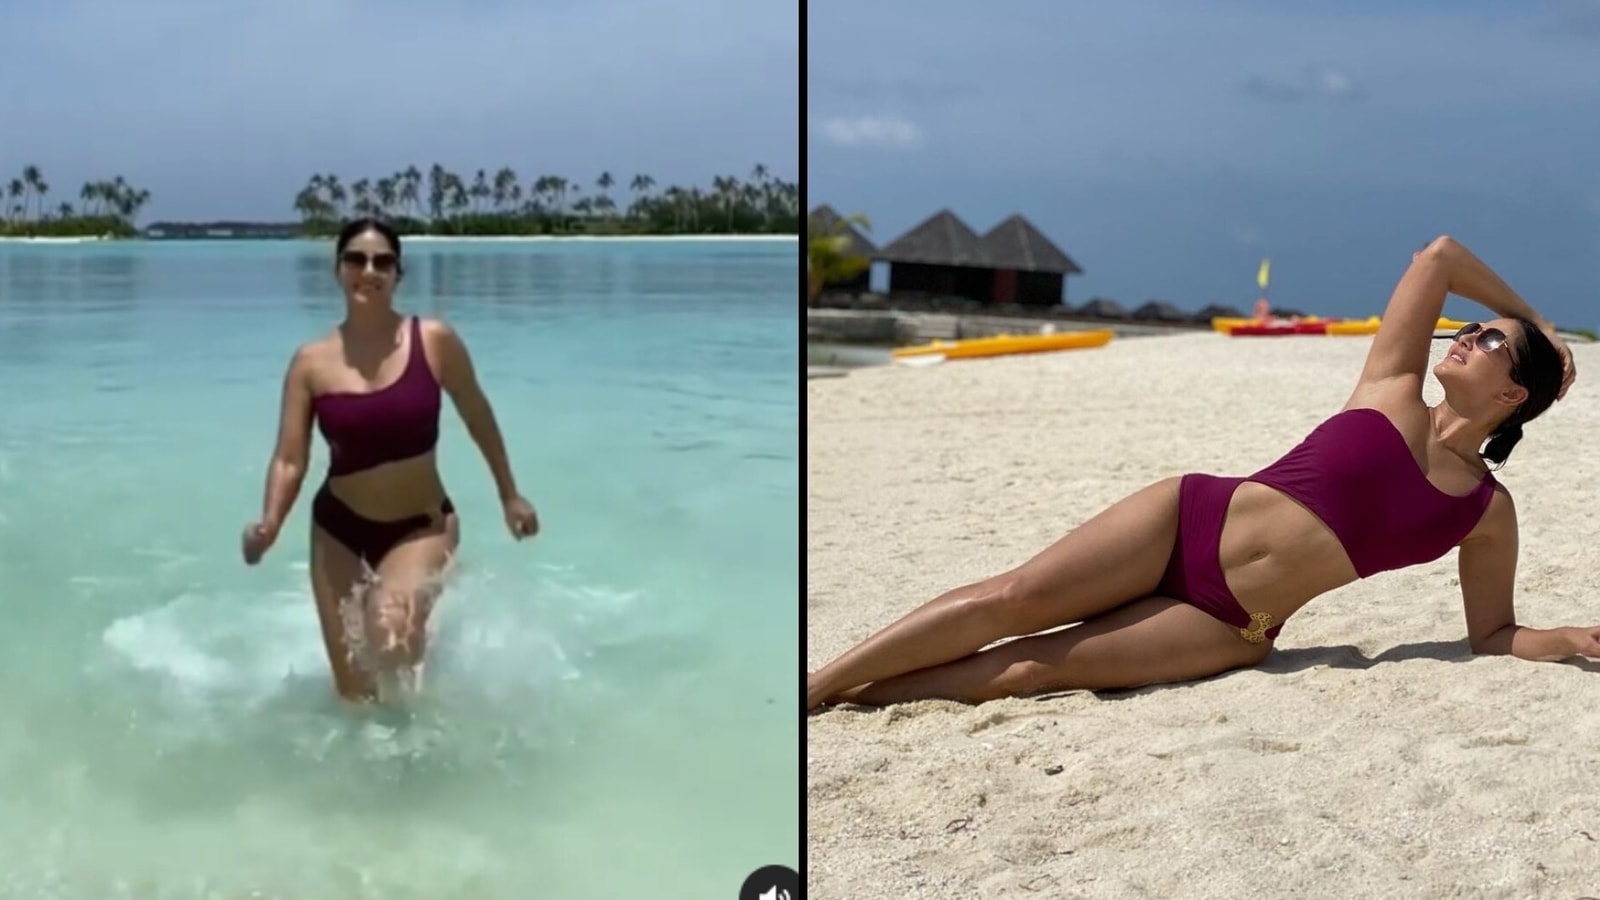 Soniliyen Xxx - Sunny Leone does slo-mo run as she emerges from water, blows kiss. Watch  video from Maldives holiday | Bollywood - Hindustan Times